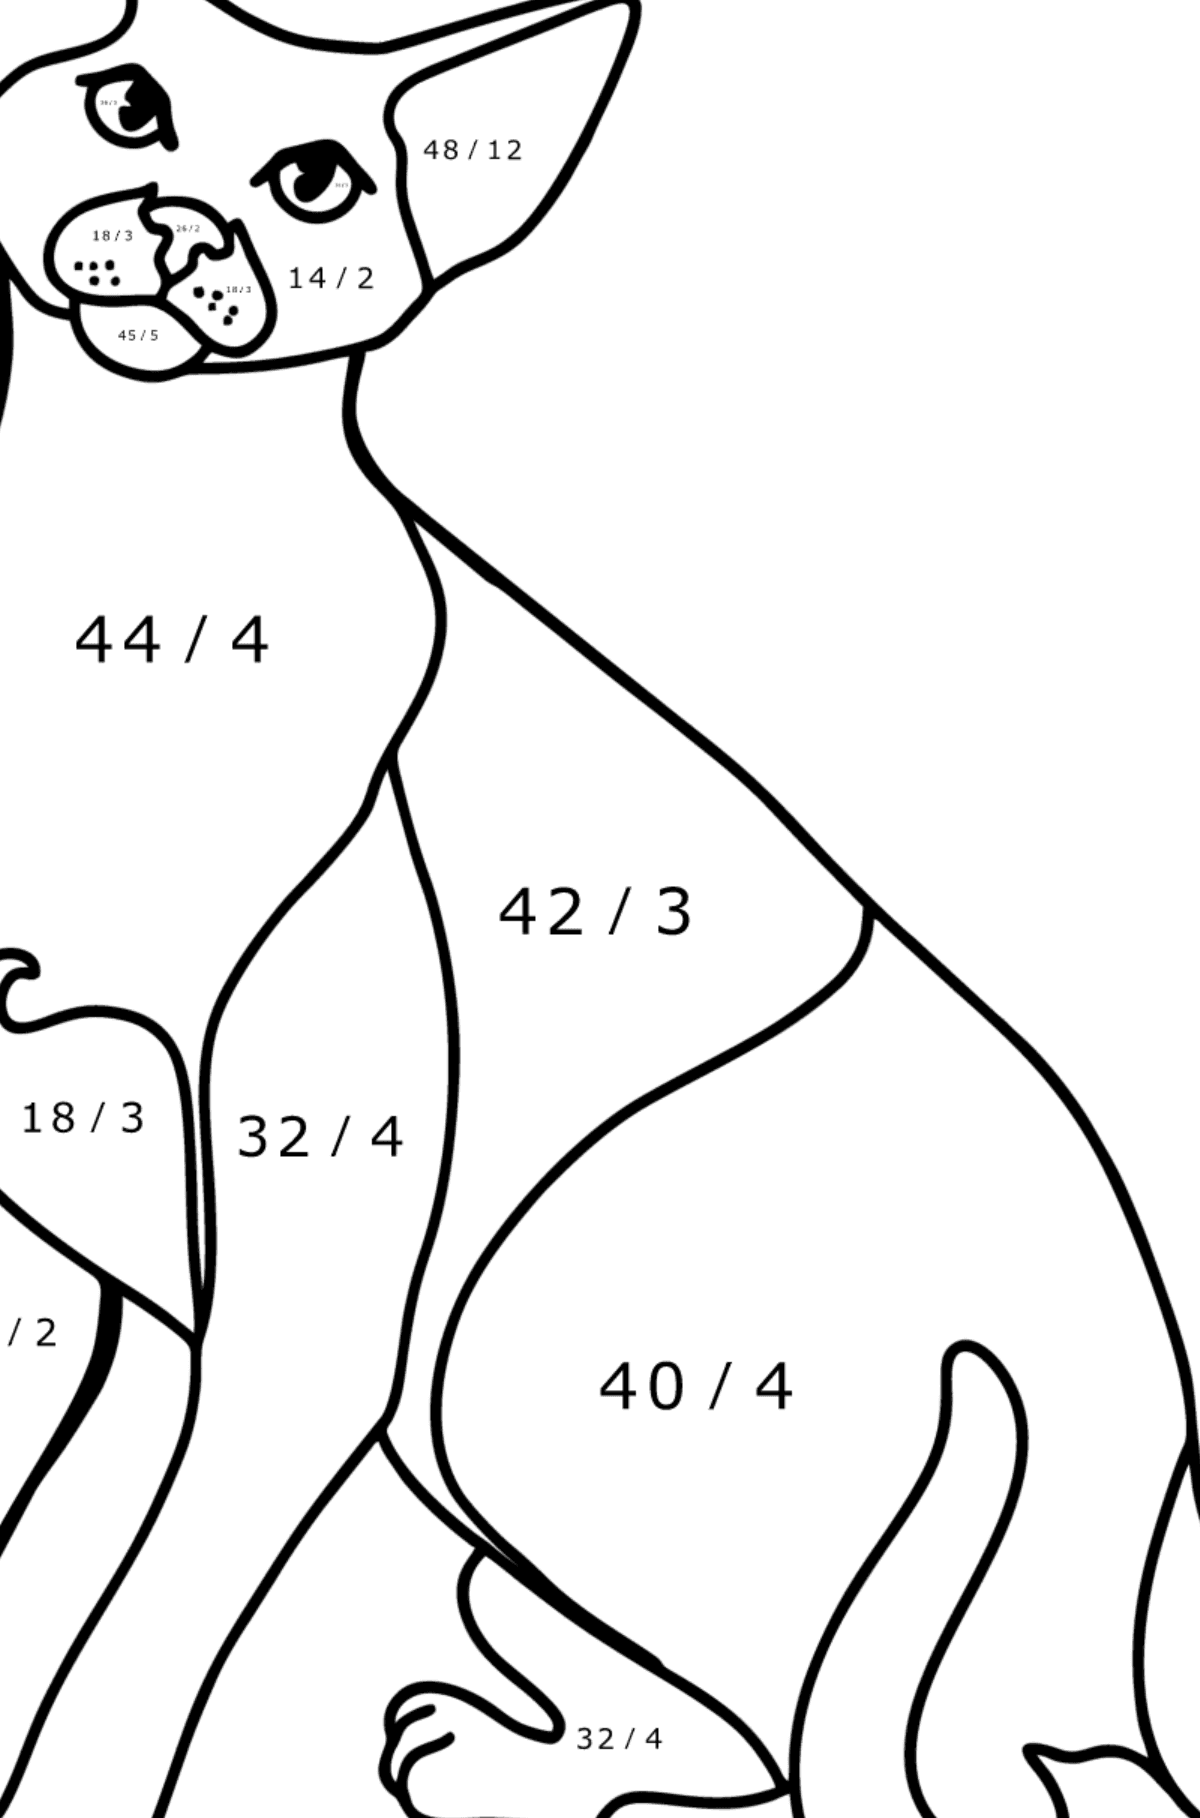 Oriental Shorthair Cat coloring page - Math Coloring - Division for Kids